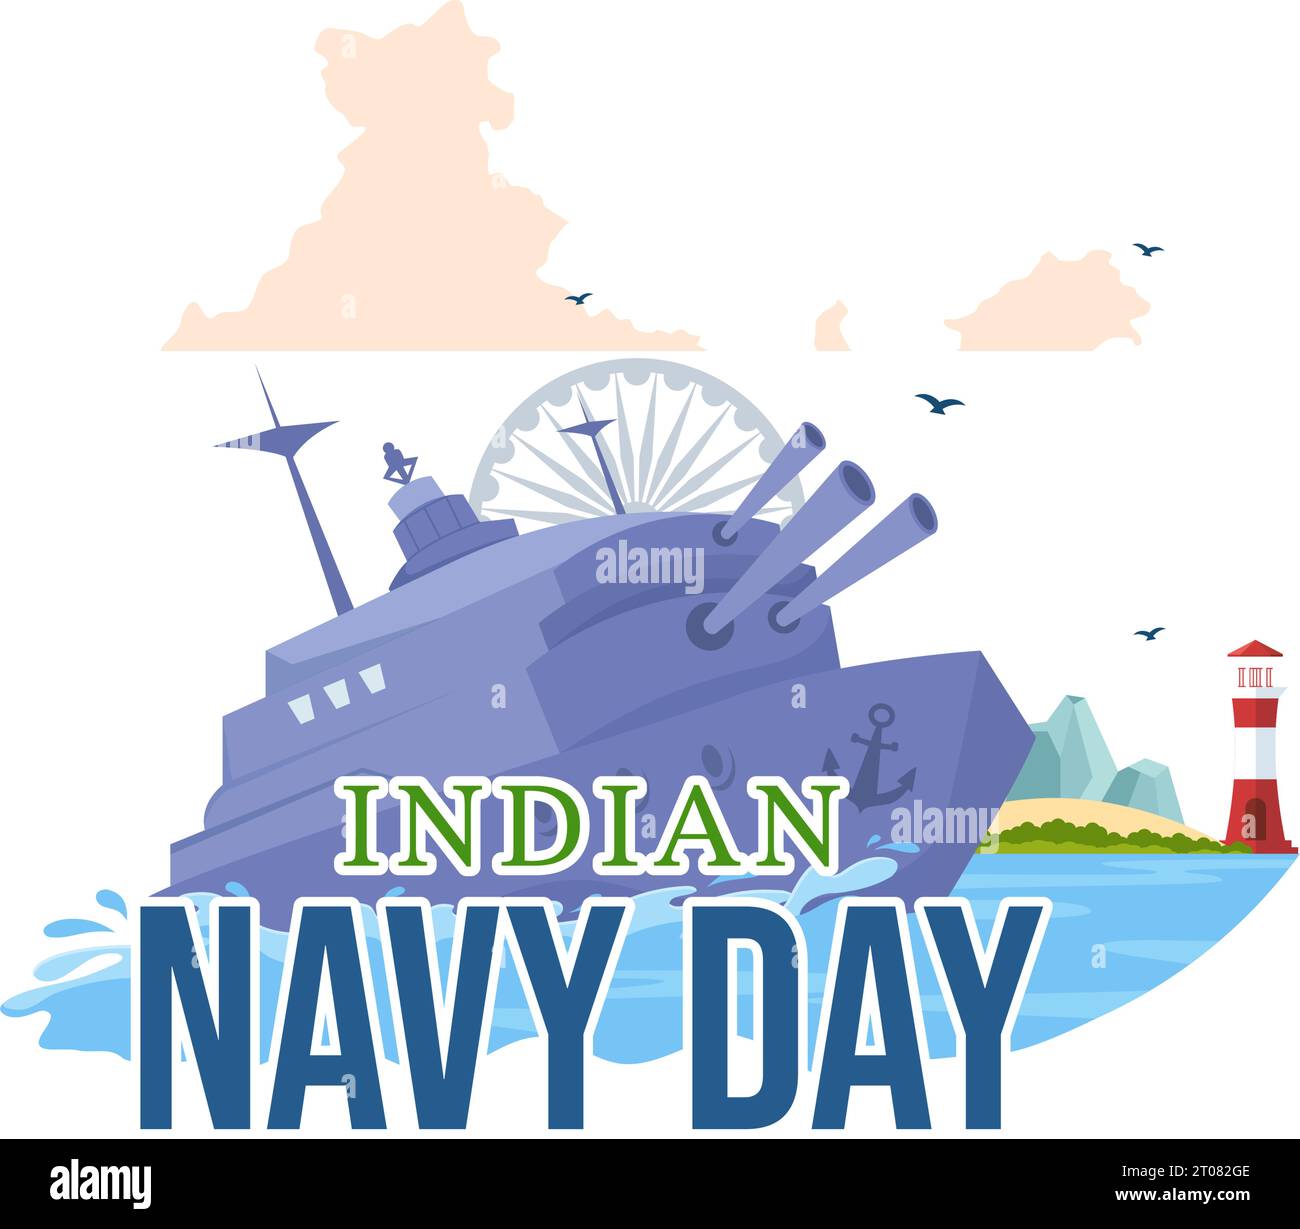 Indian Navy Day Vector Illustration on December 4 with Fighter Ships for People Military Army Saluting Appreciating Soldiers in Background Design Stock Vector